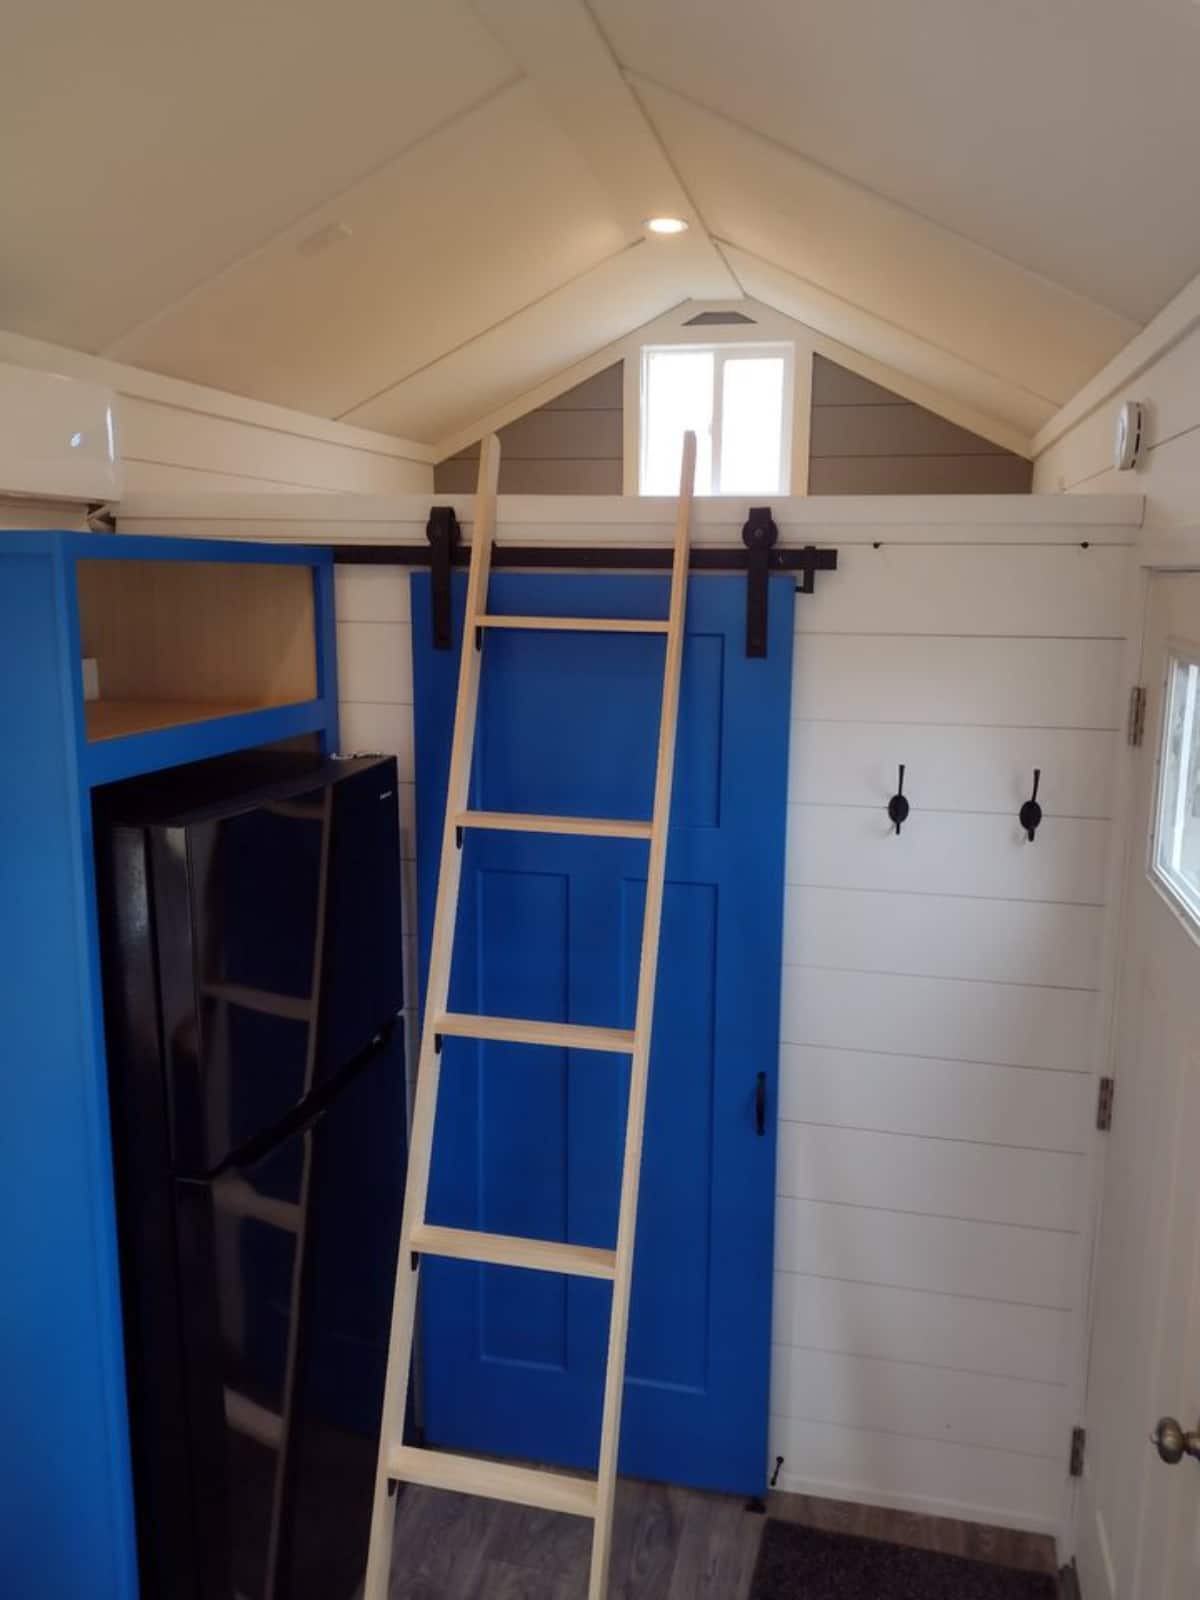 Loft 1 above the toilet is accessible through ladder